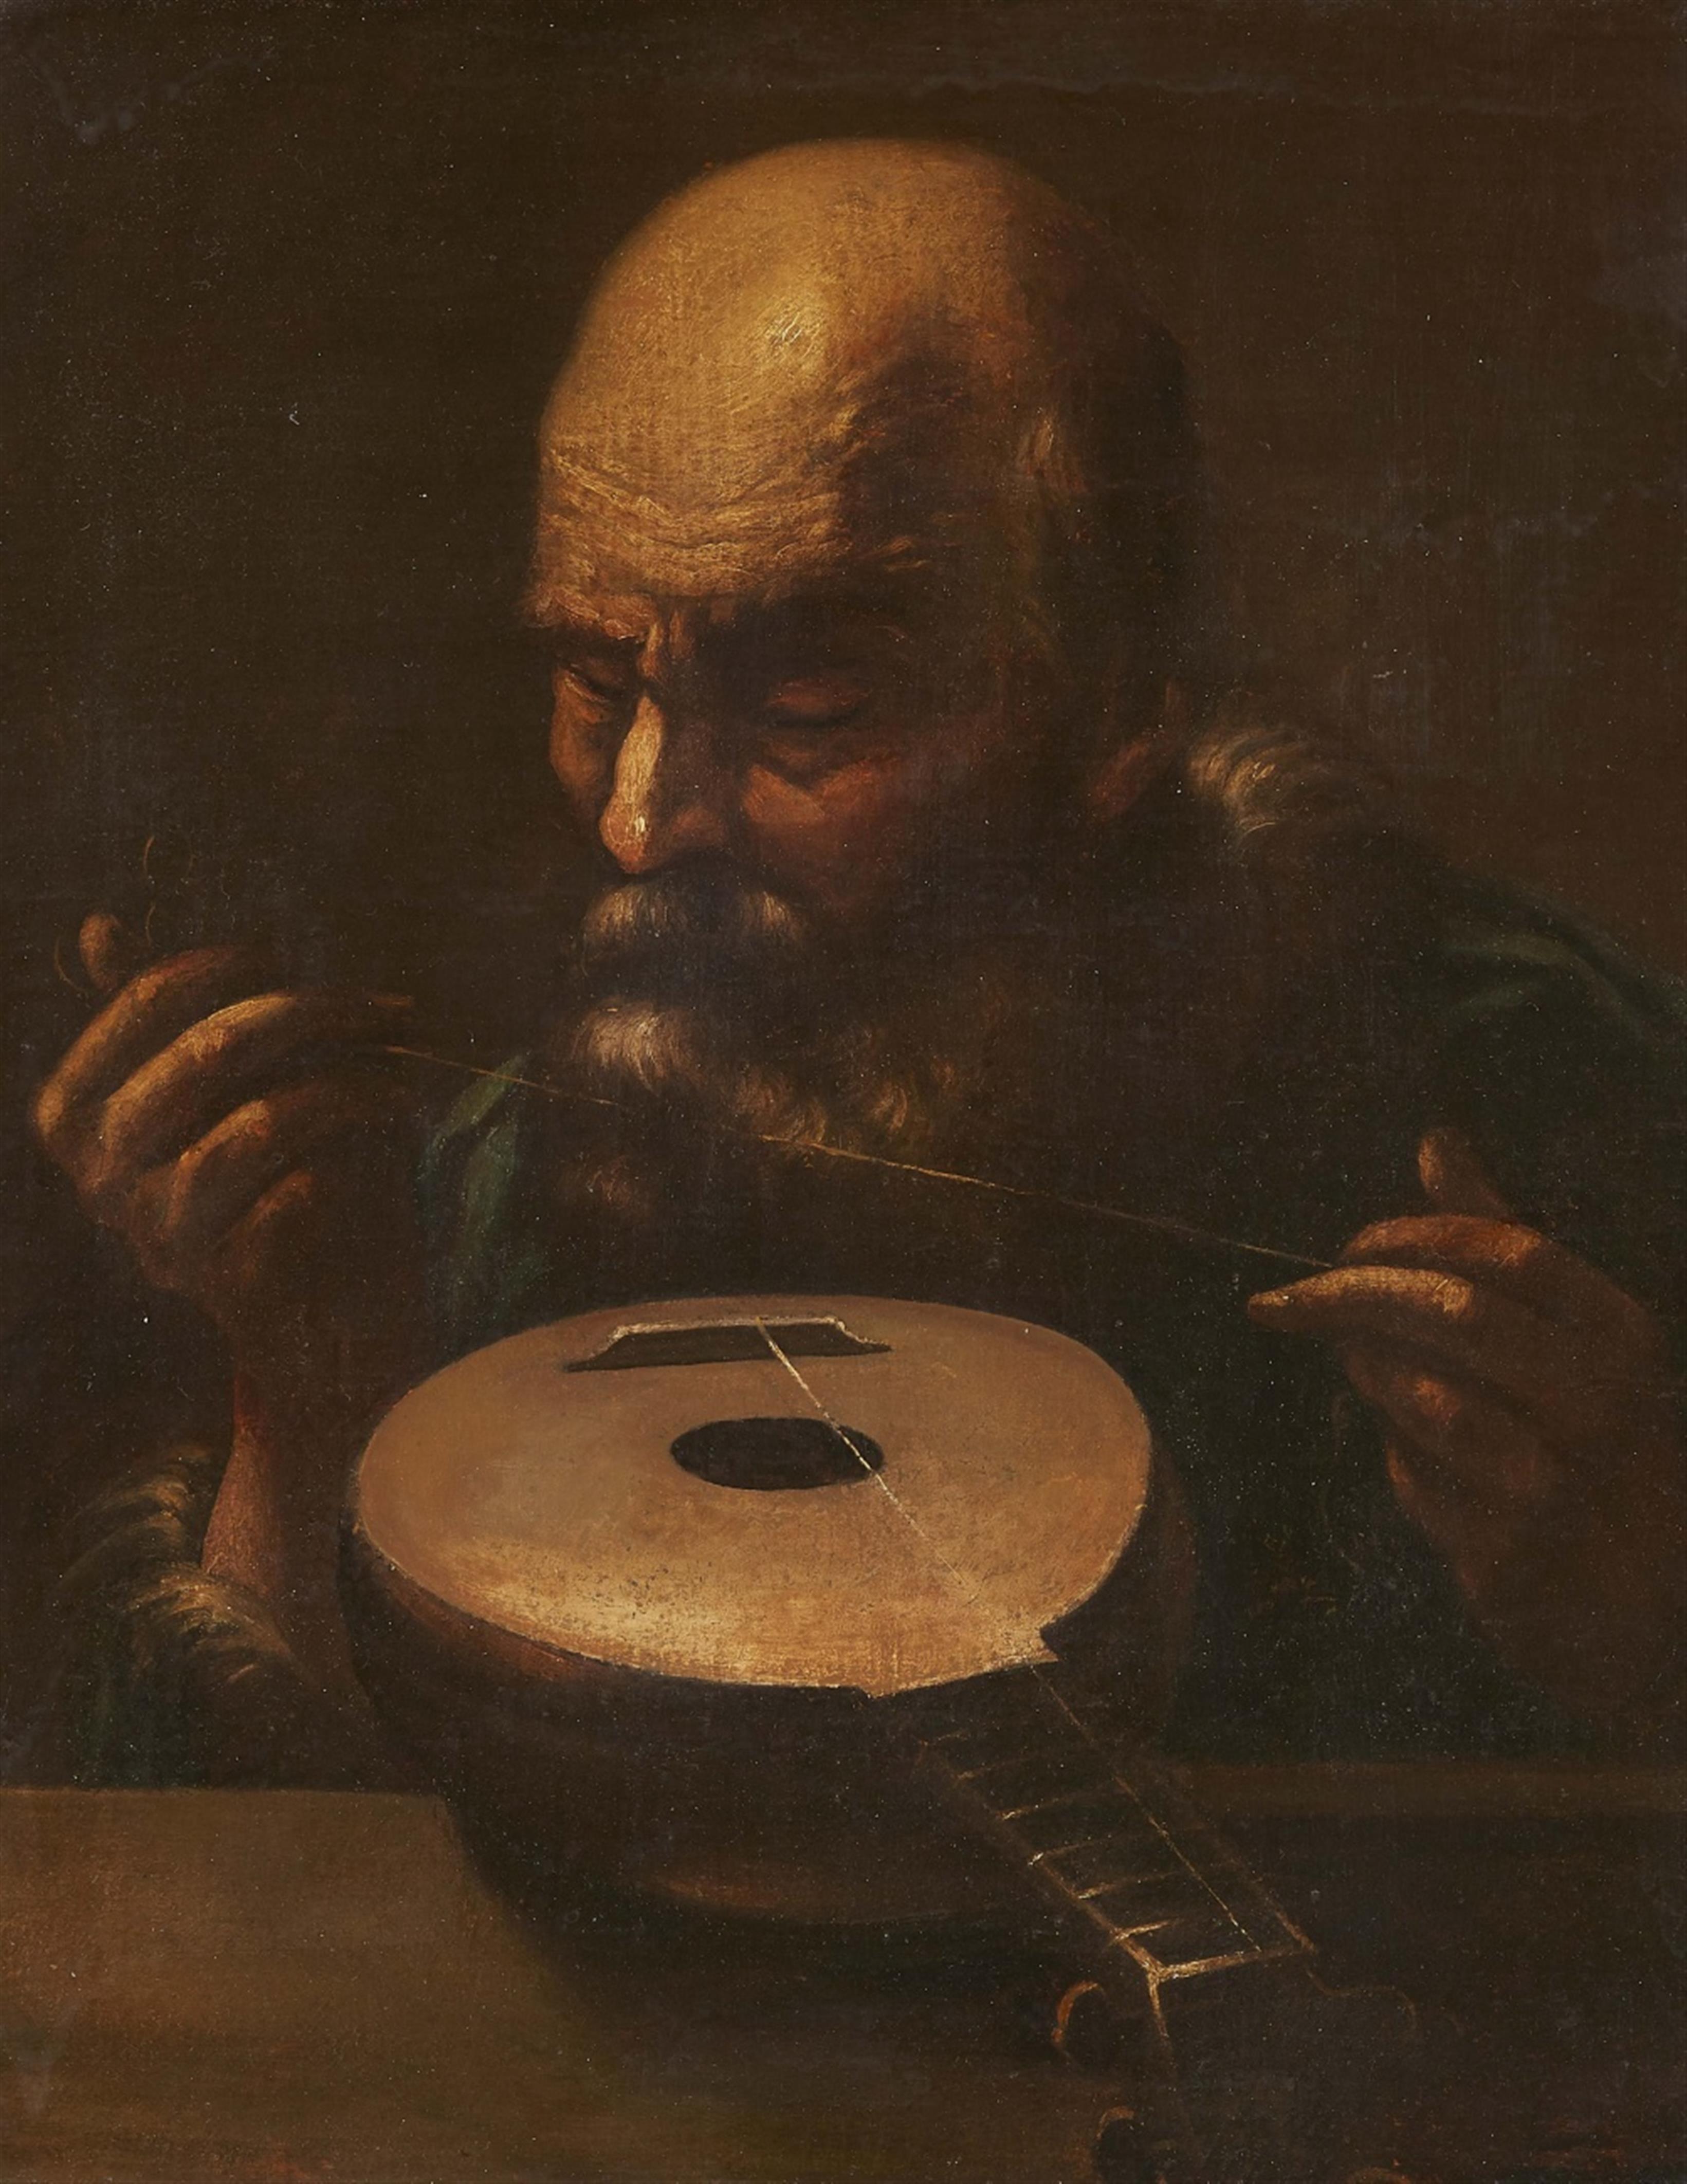 Bolognese School 17th century - The Instrument Maker - image-1